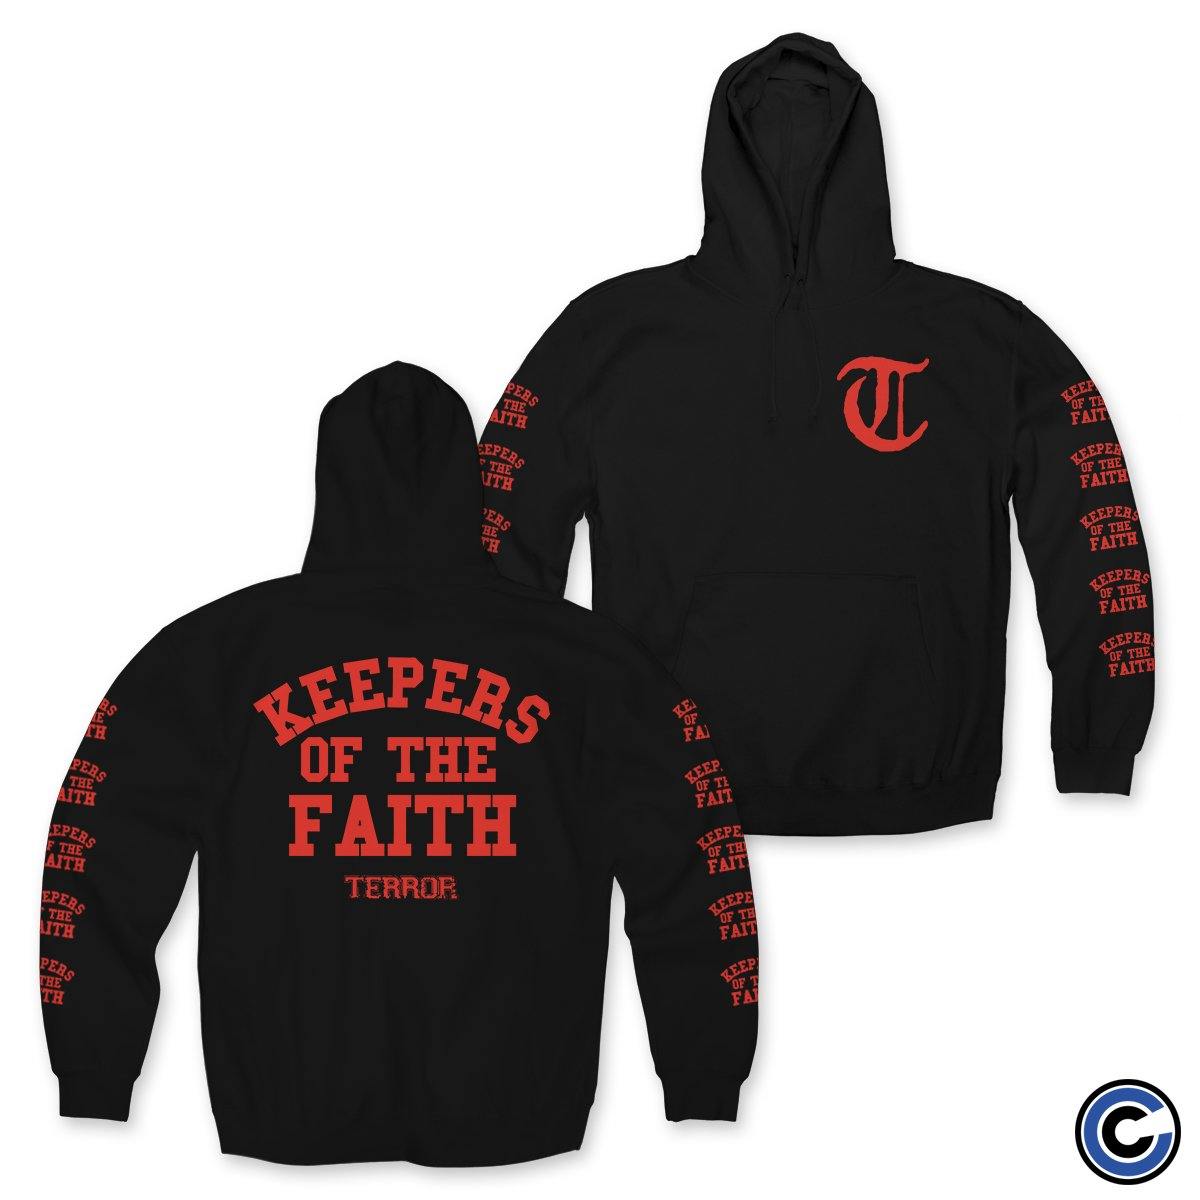 Buy – Terror "Keepers Of The Faith" Hoodie – Band & Music Merch – Cold Cuts Merch